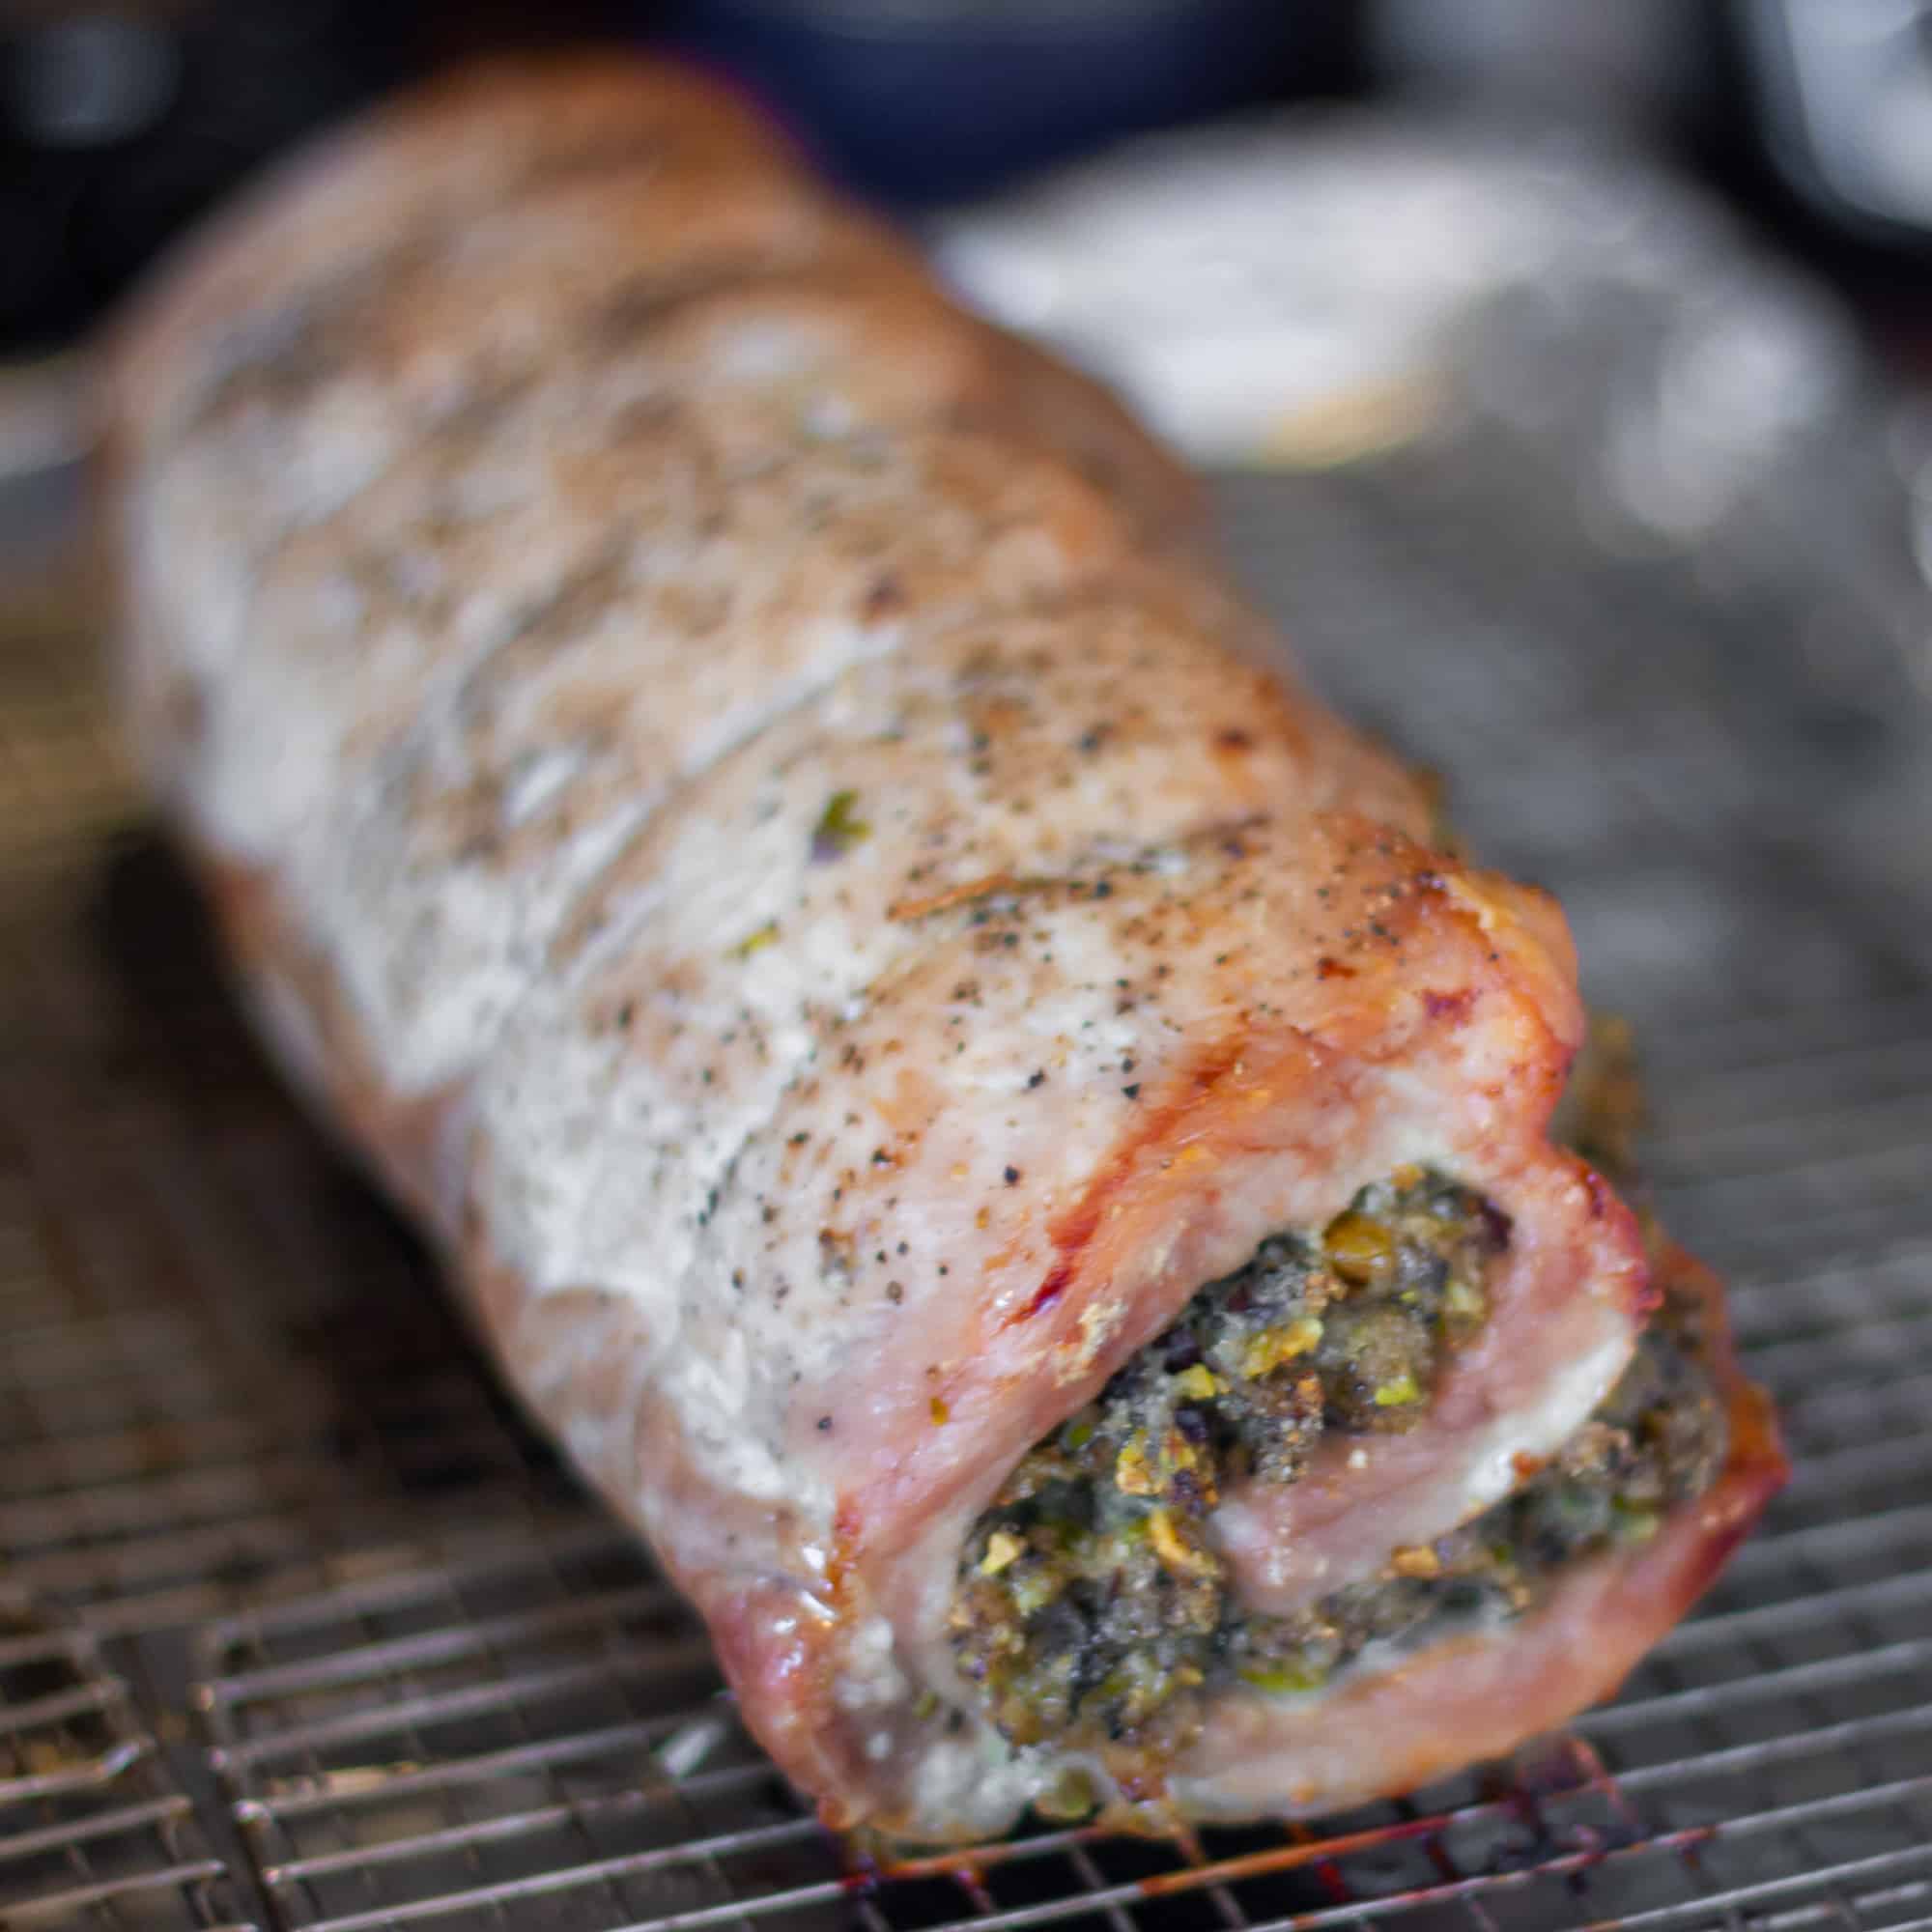 Here is the finished roasted stuffed pork loin.